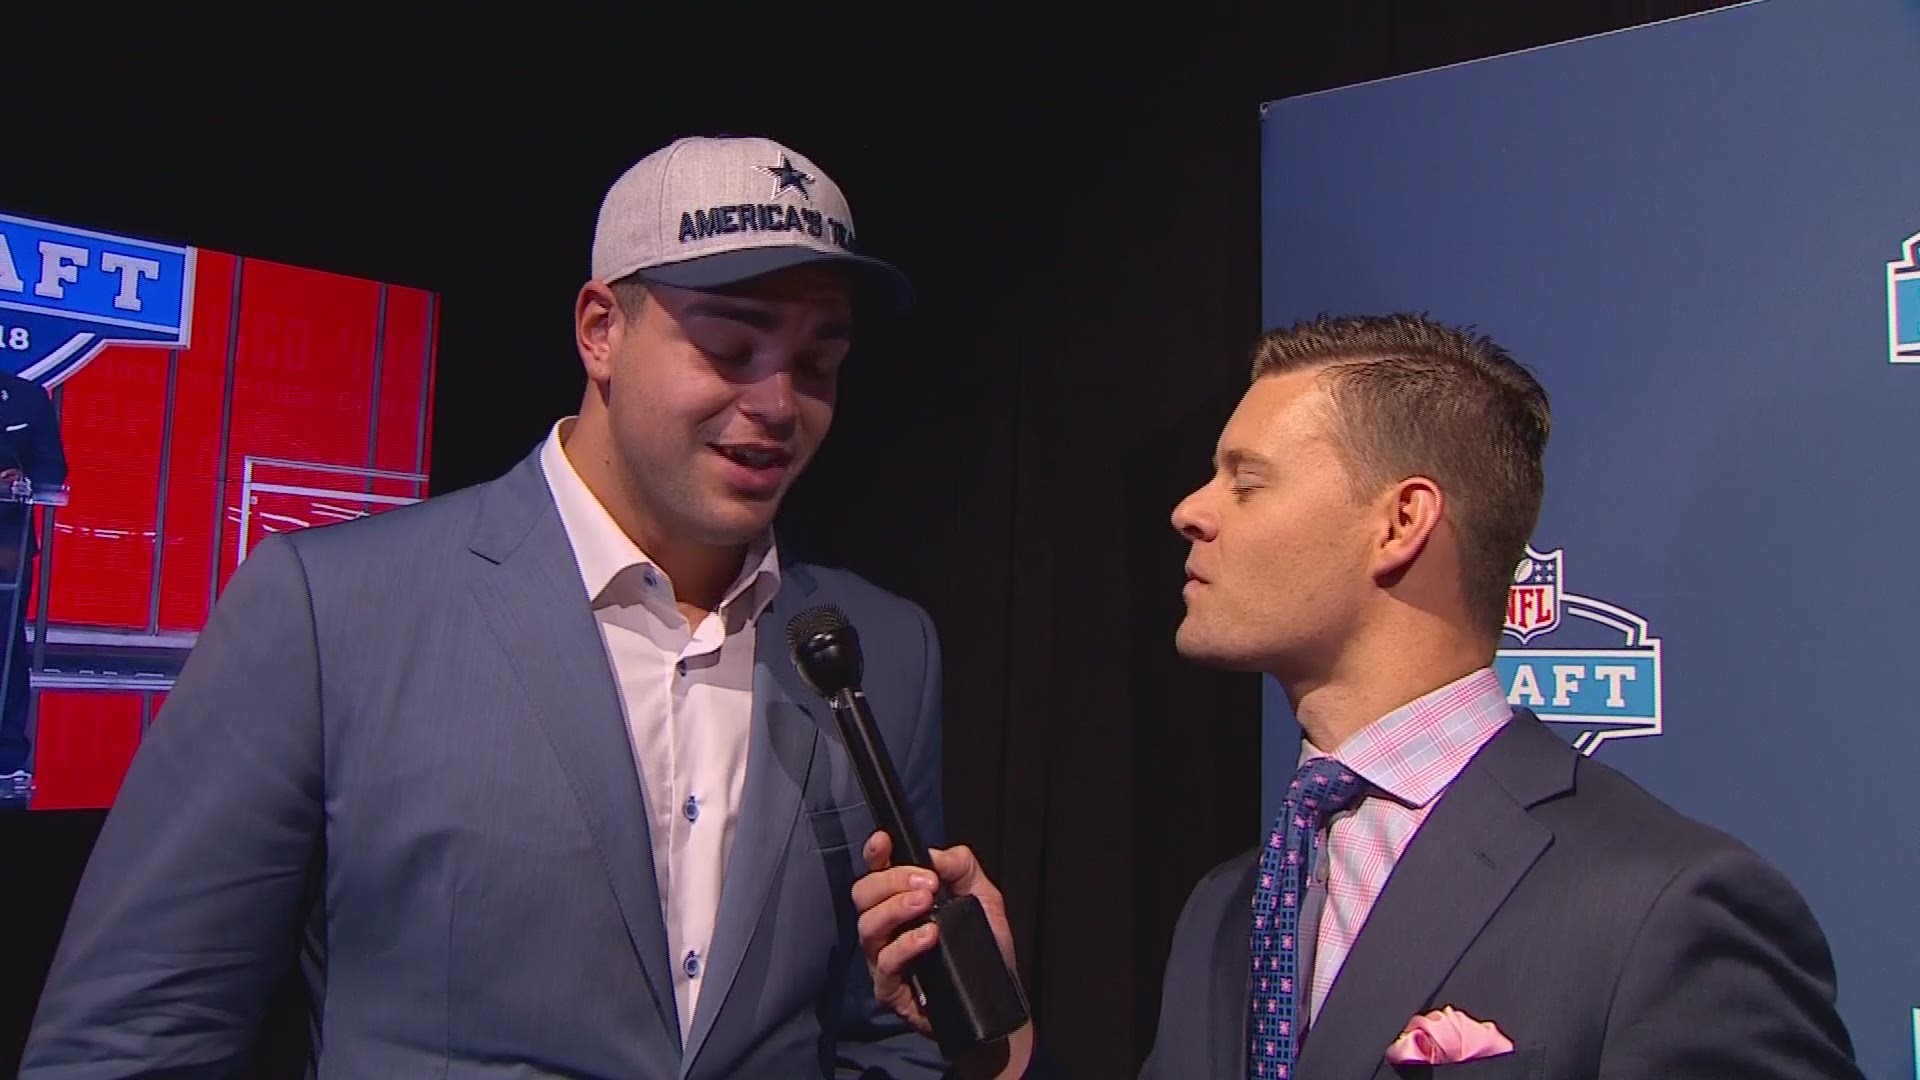 Cowboys second round pick Connor Williams talks 1-on-1 with Mike Leslie about being a Coppell product selected in the NFL Draft by the Dallas Cowboys.